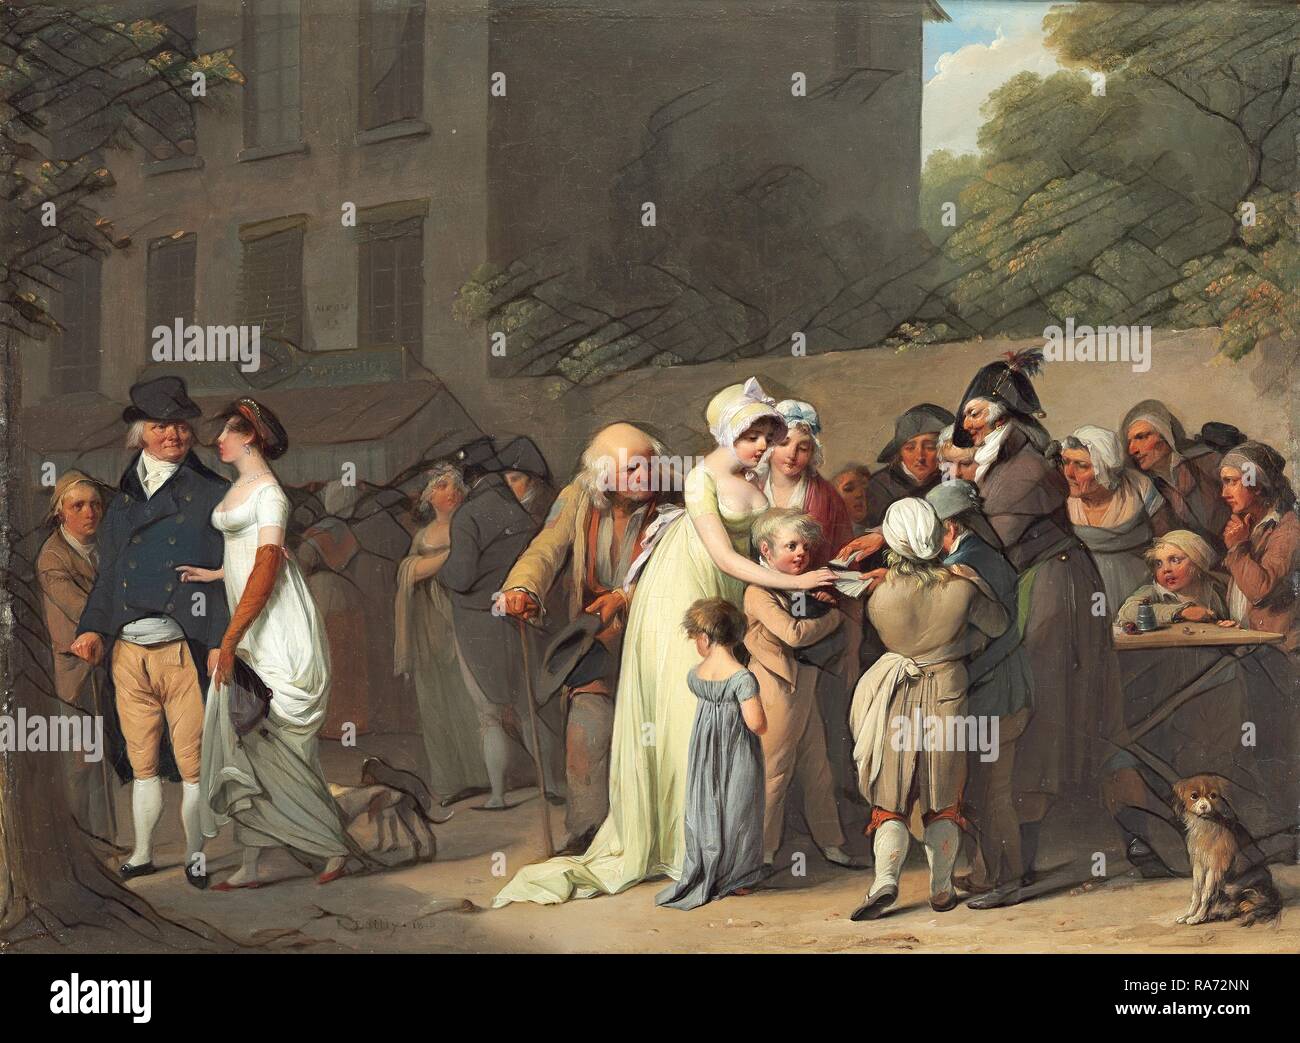 Louis-Léopold Boilly (French, 1761 - 1845), The Card Sharp on the Boulevard, 1806, oil on wood. Reimagined Stock Photo